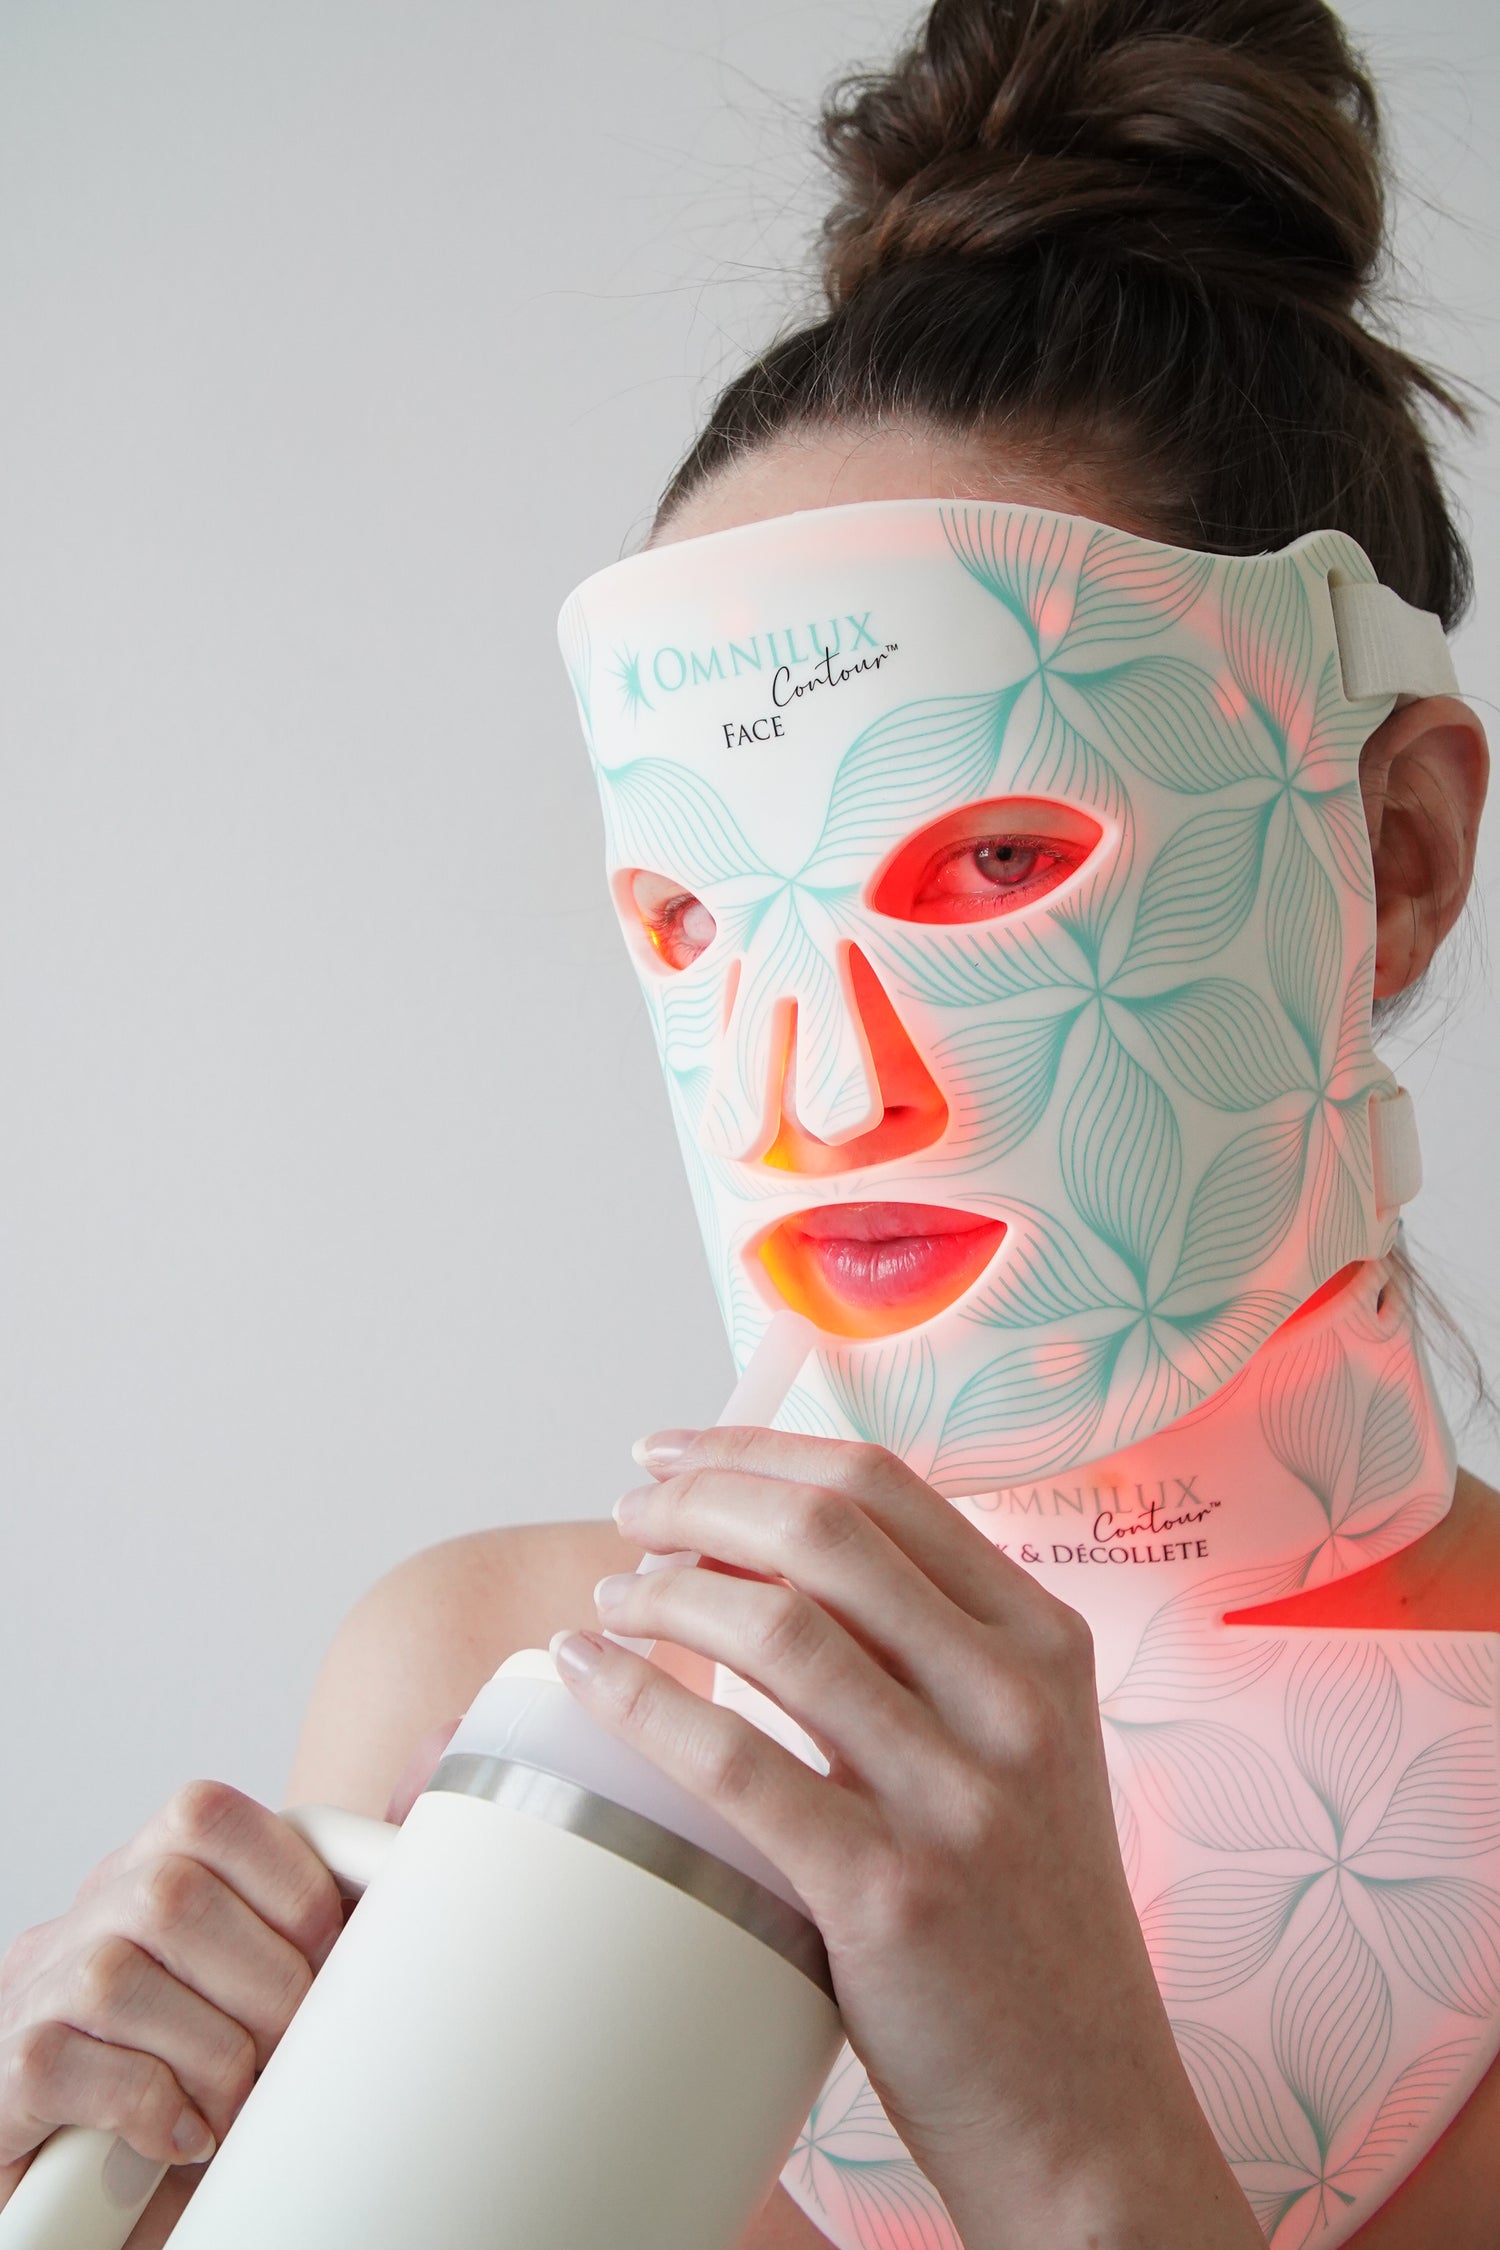 Rejuvenate Your Skin with Red Light Therapy